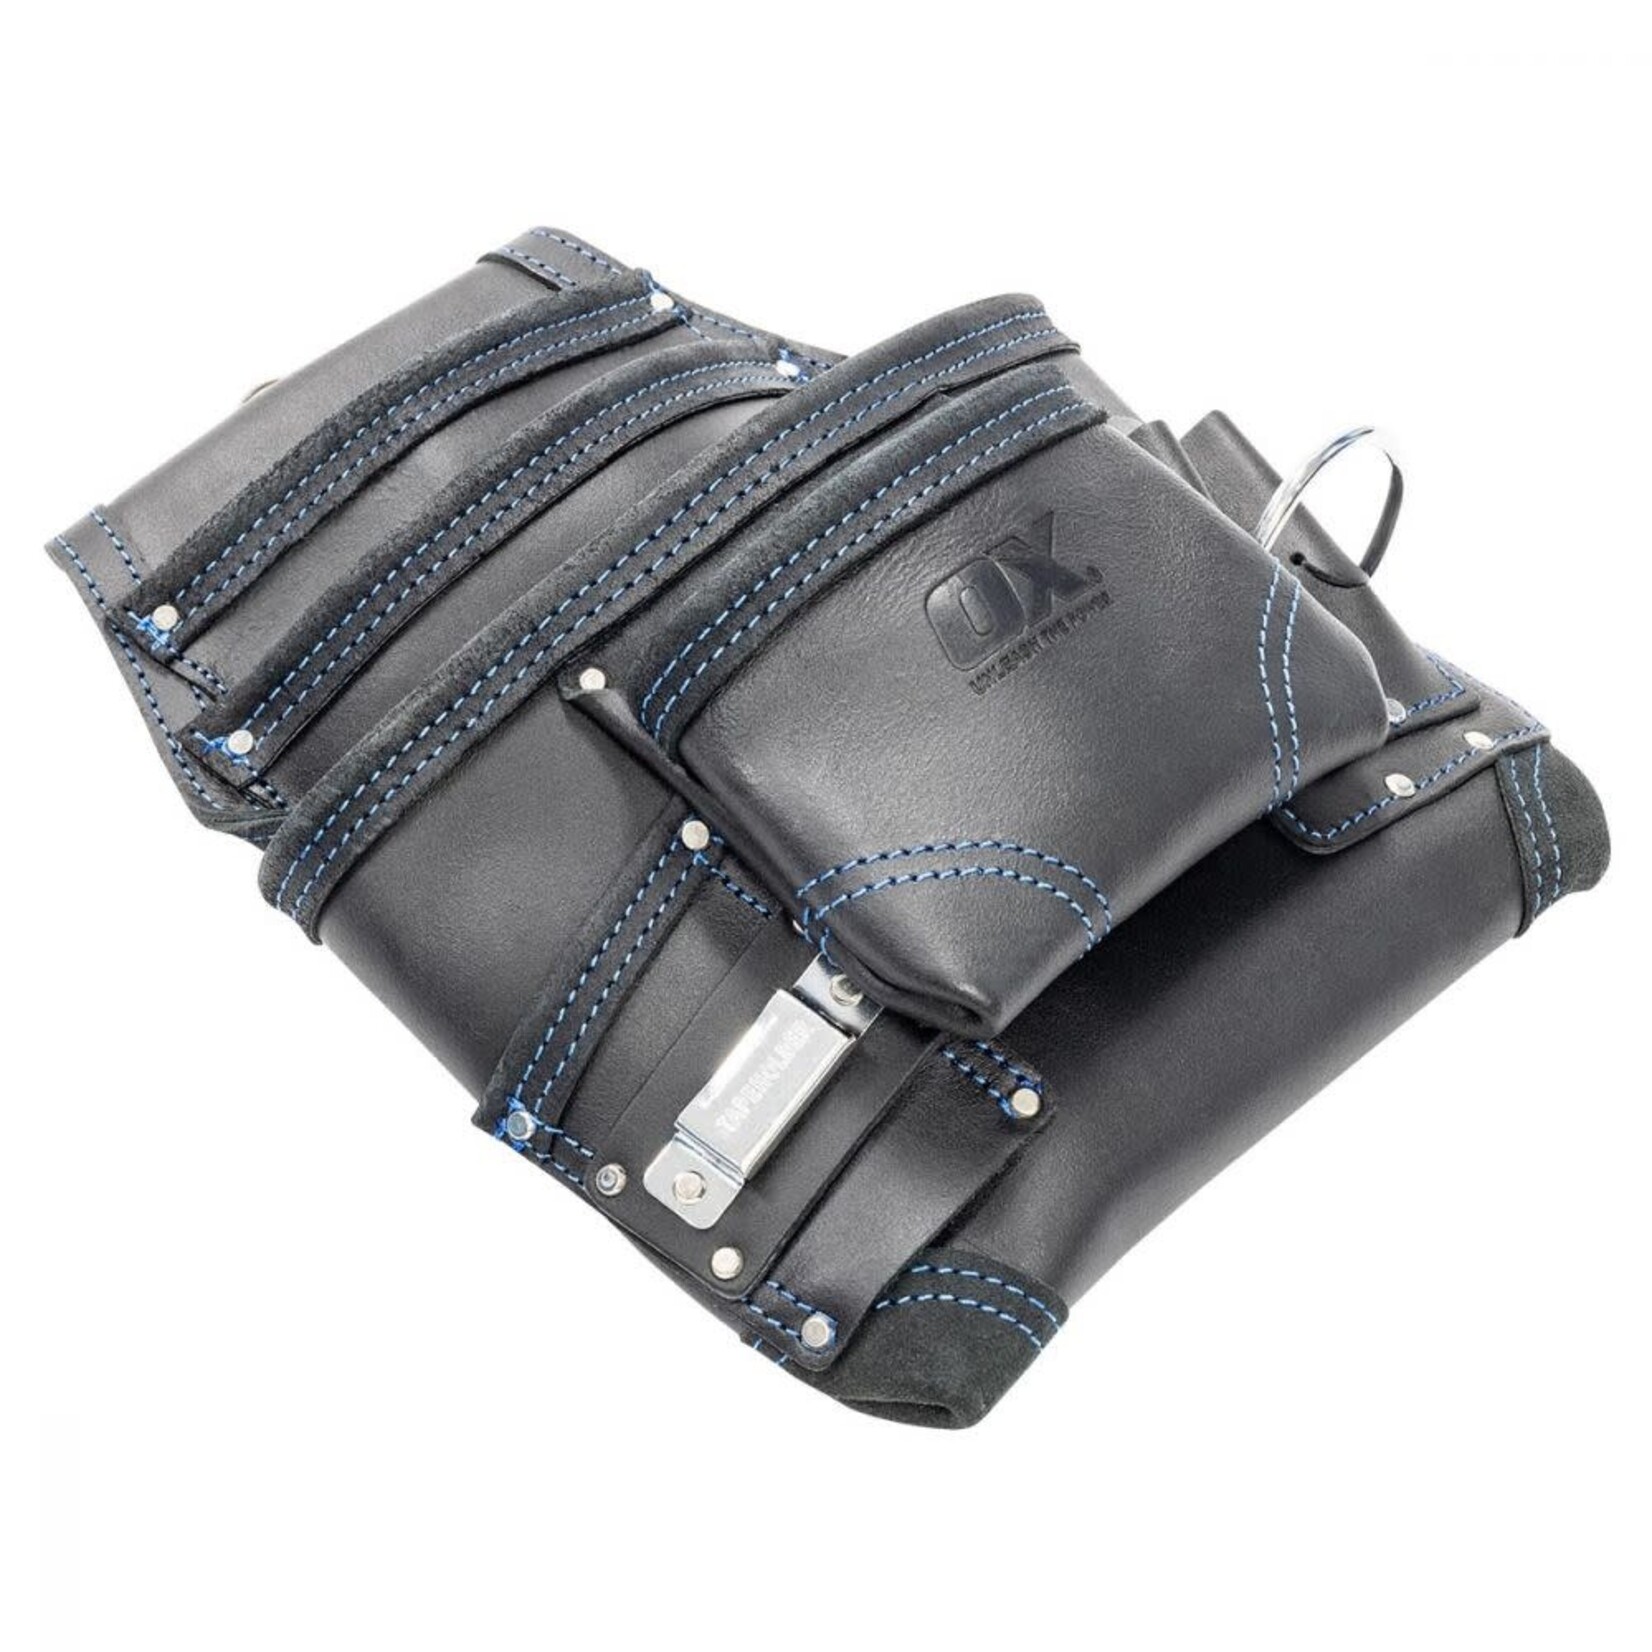 Ox Tools OX Trade Black Leather